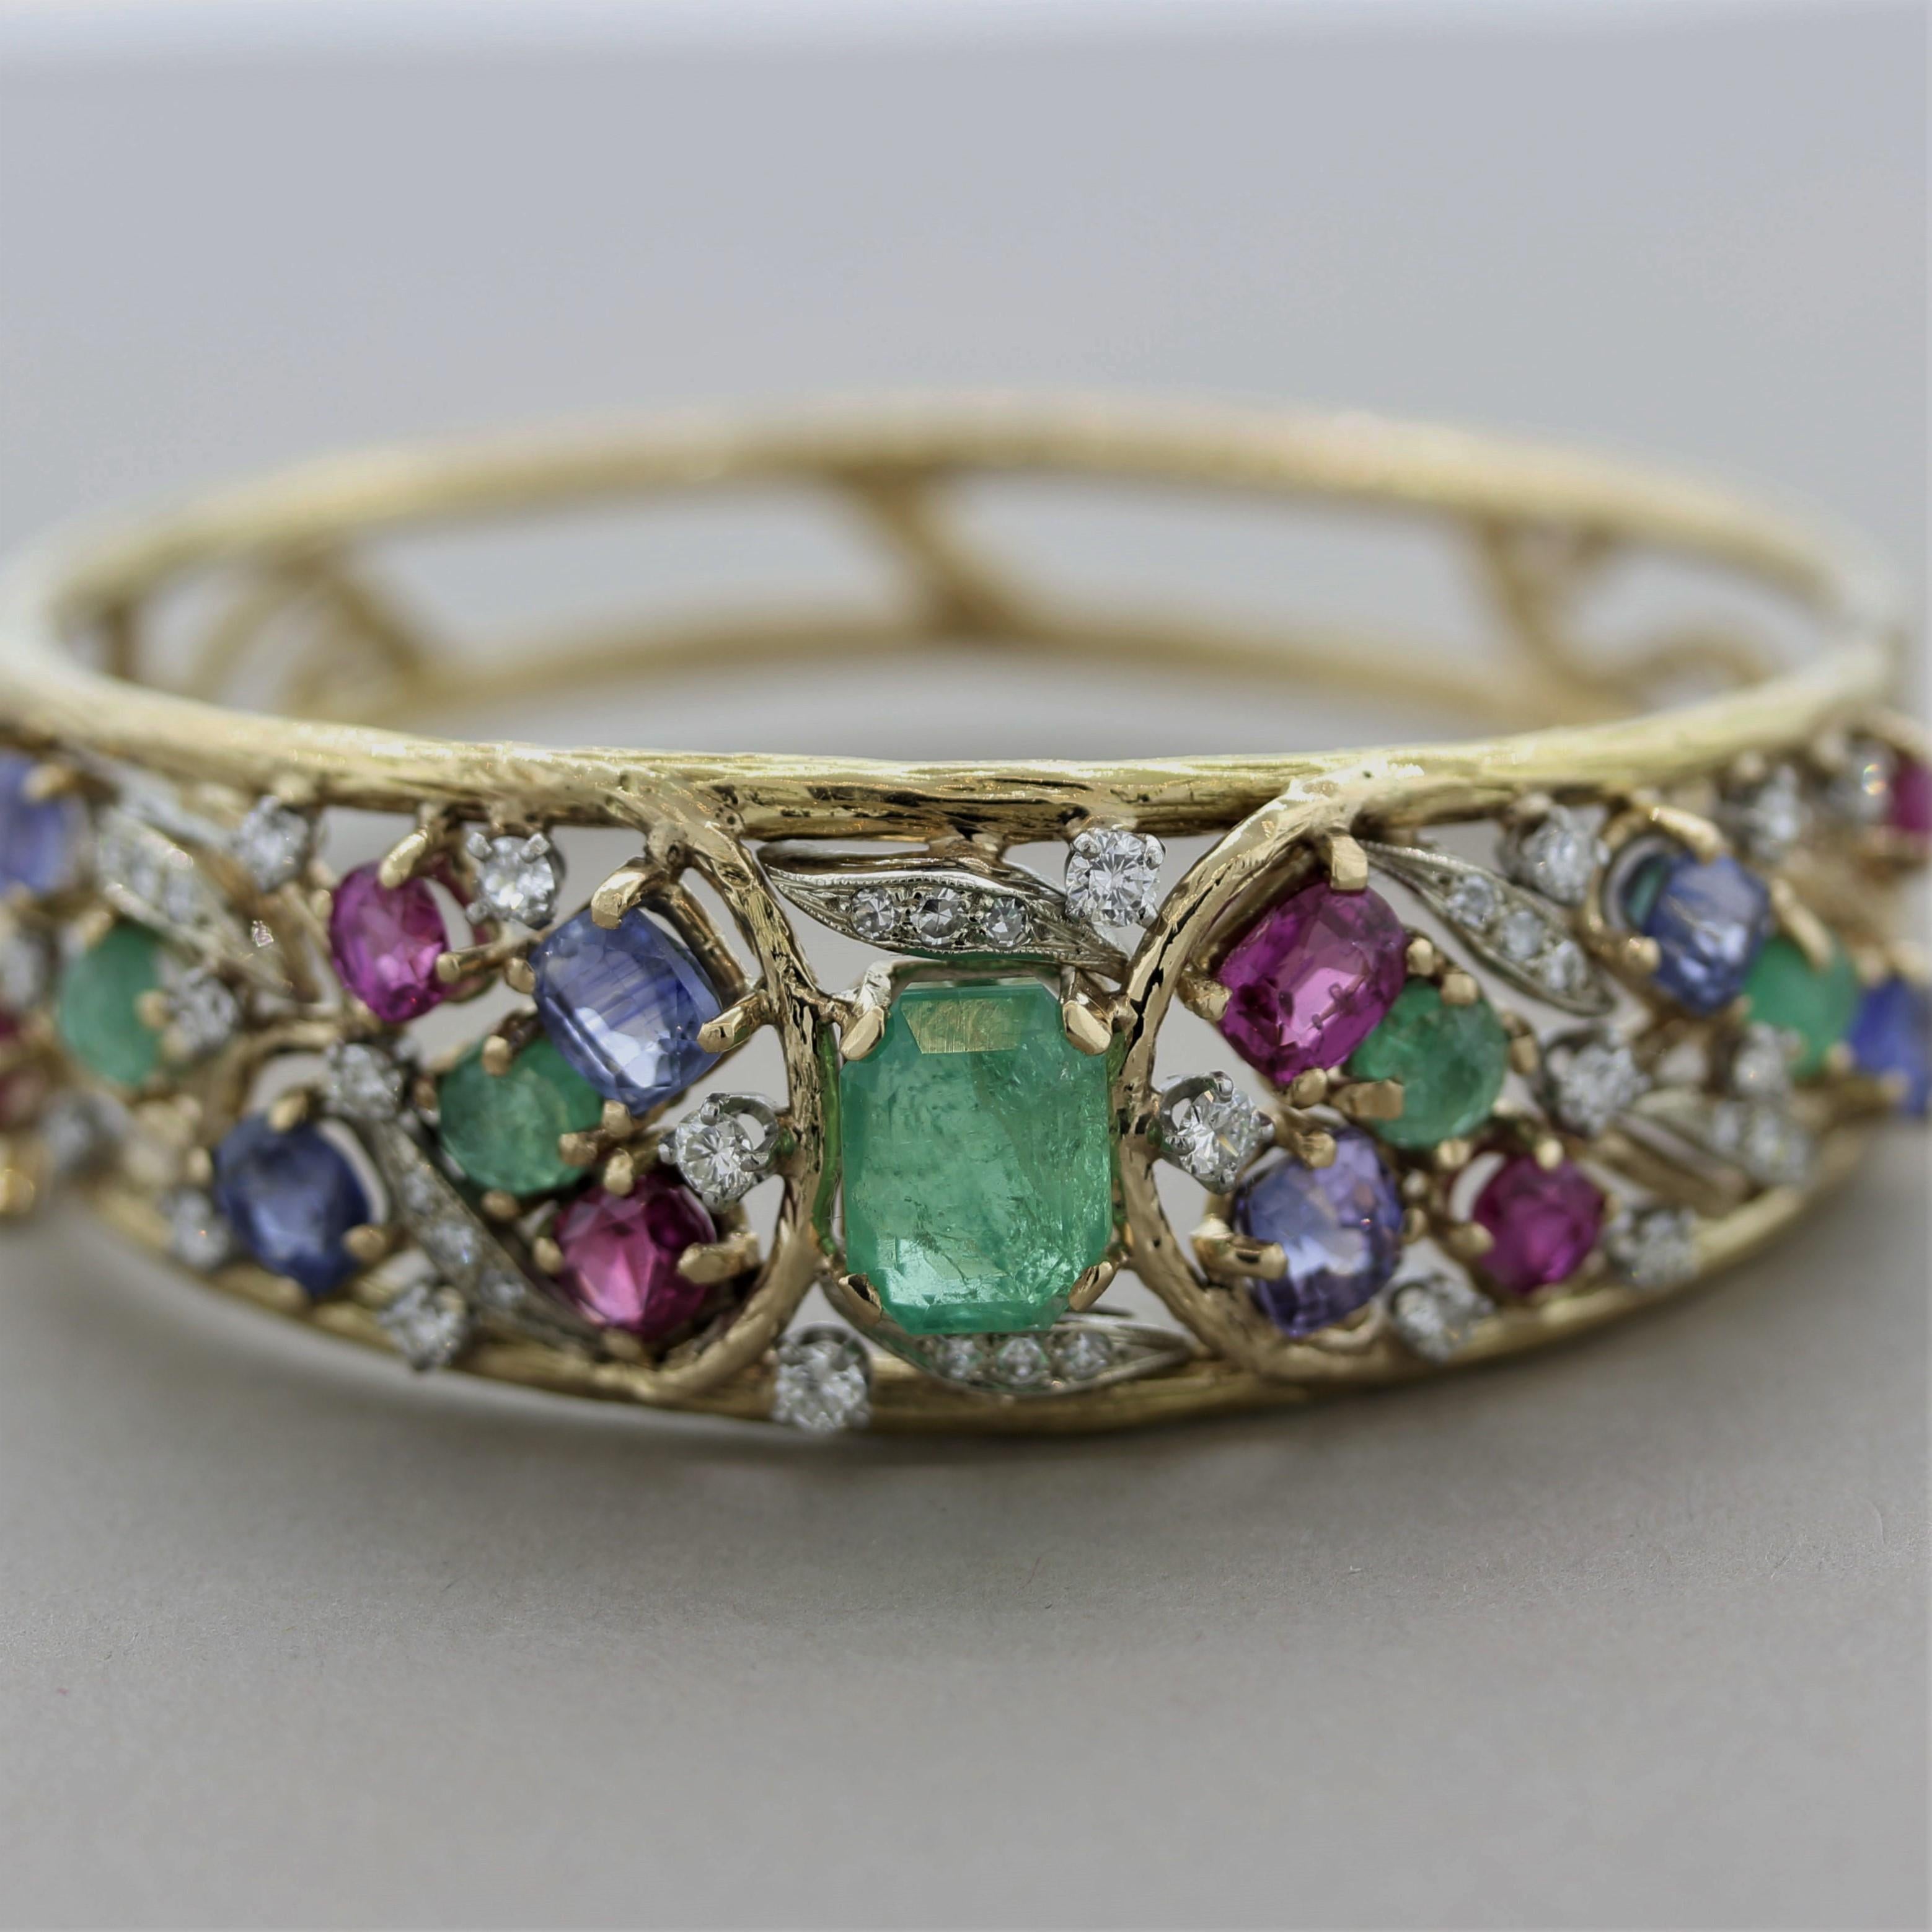 A hand-made treasure from the 1970’s! It features approximately 5 carats of emeralds (largest 3.50 carats), 4.75 carats of sapphire and 2.60 carats of fine rubies. Adding to that are 1 carat of round brilliant-cut diamonds which add sparkle and